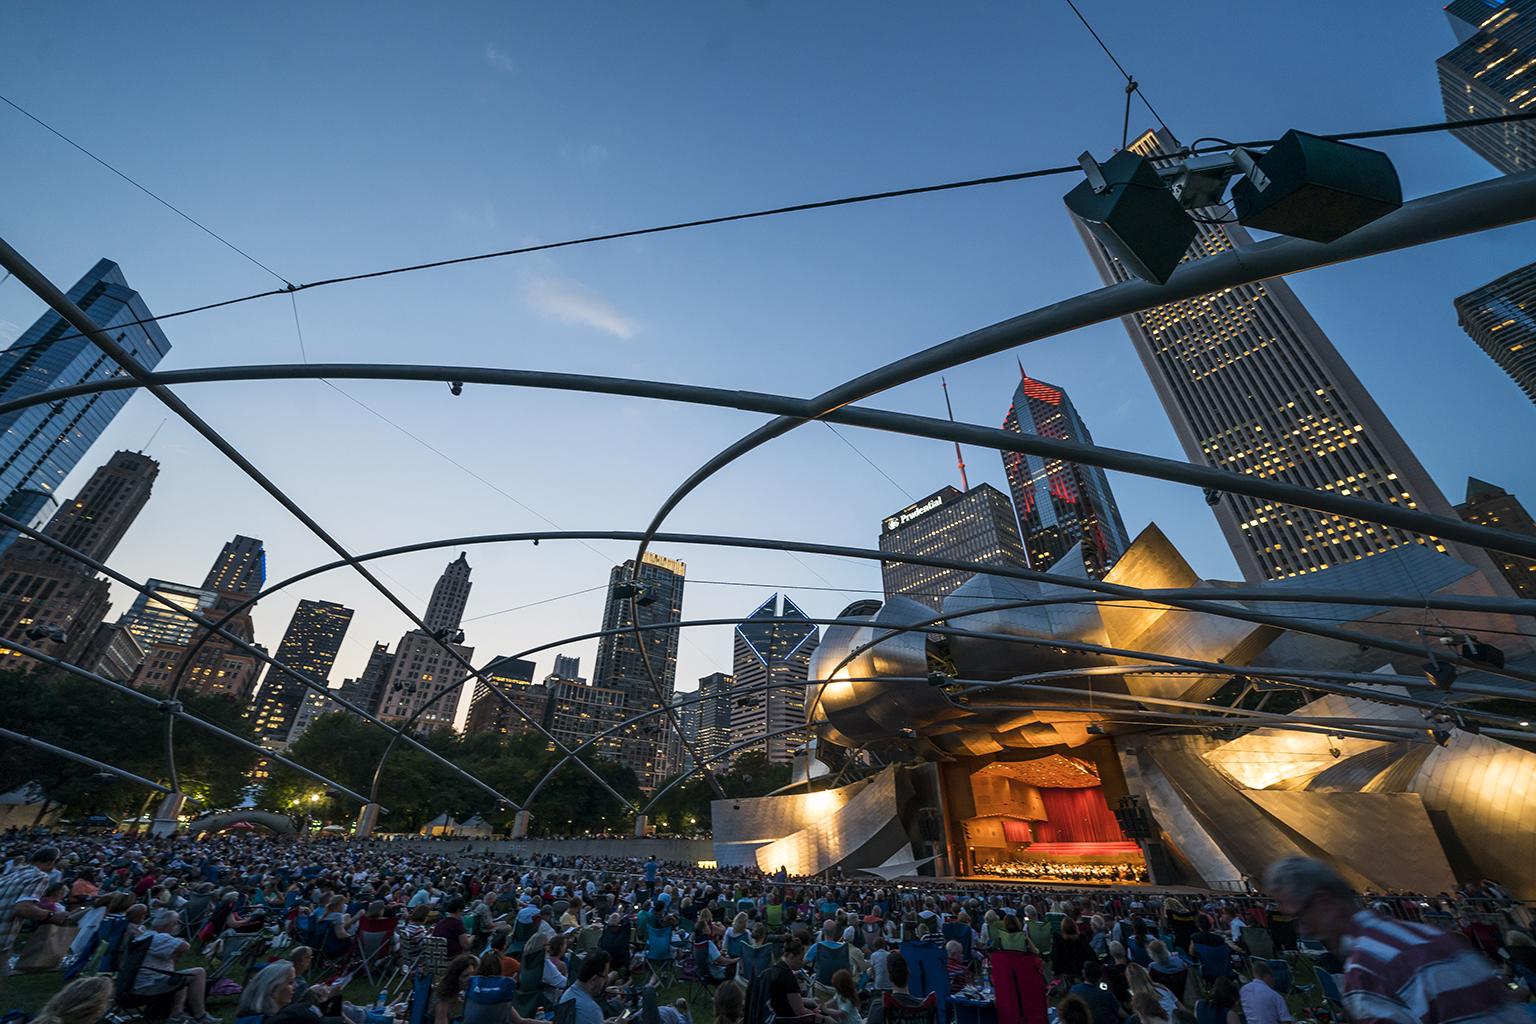 The Chicago Symphony Orchestra and Civic Orchestra of Chicago, led by Zell Music Director Riccardo Muti, performed a free “Concert for Chicago” at the Jay Pritzker Pavilion in Millennium Park on Sept. 20, 2018. (Photo Credit: Todd Rosenberg)